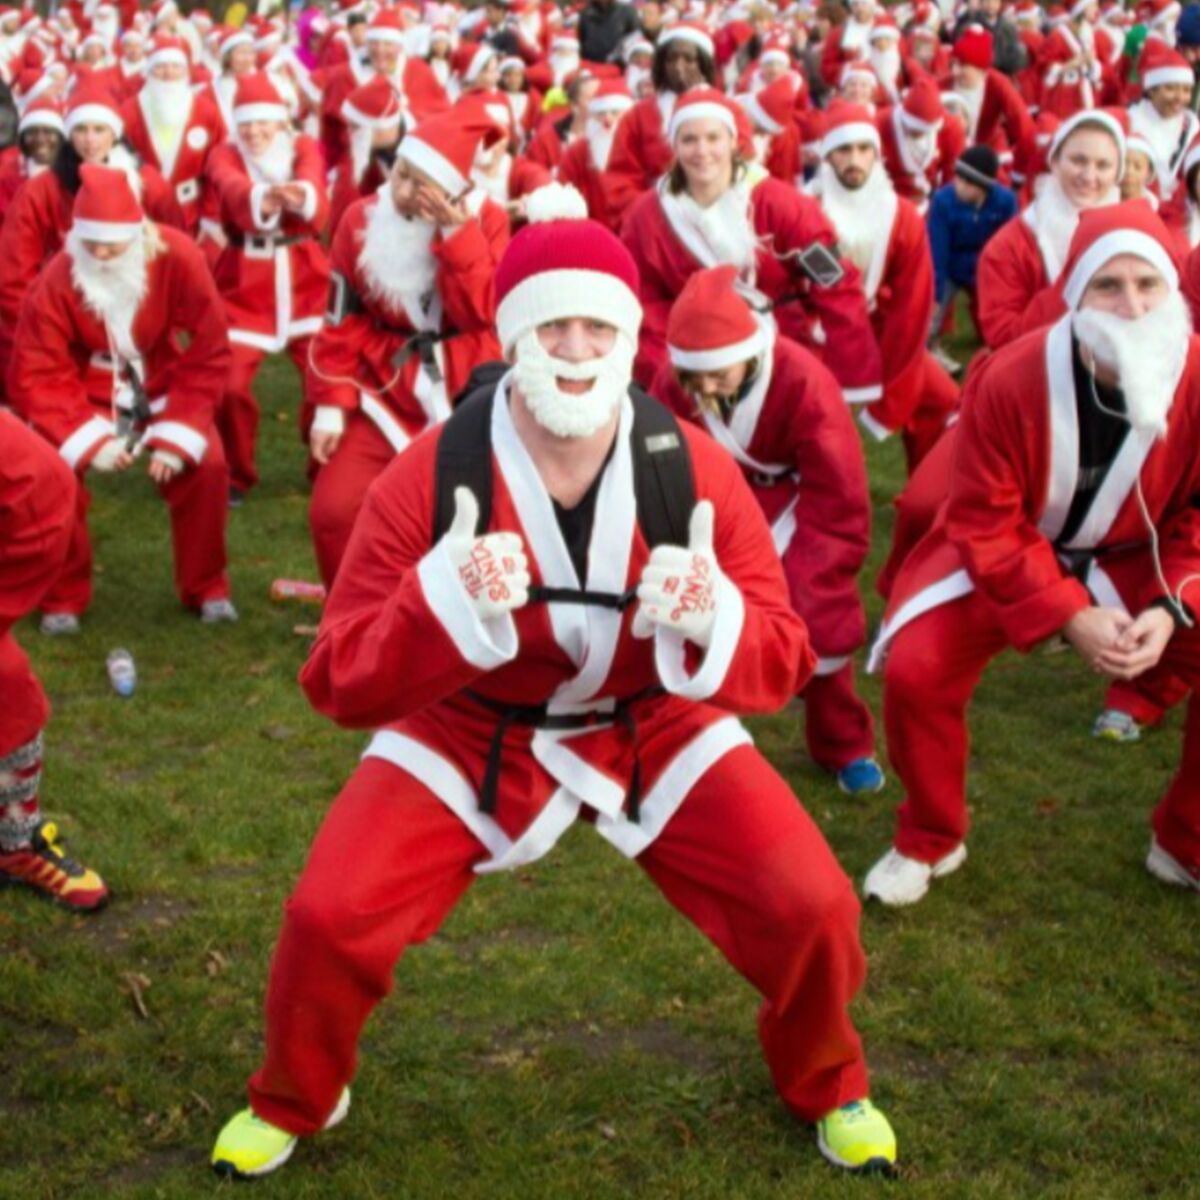 A crowd of Santas gathers for a Christmas race.